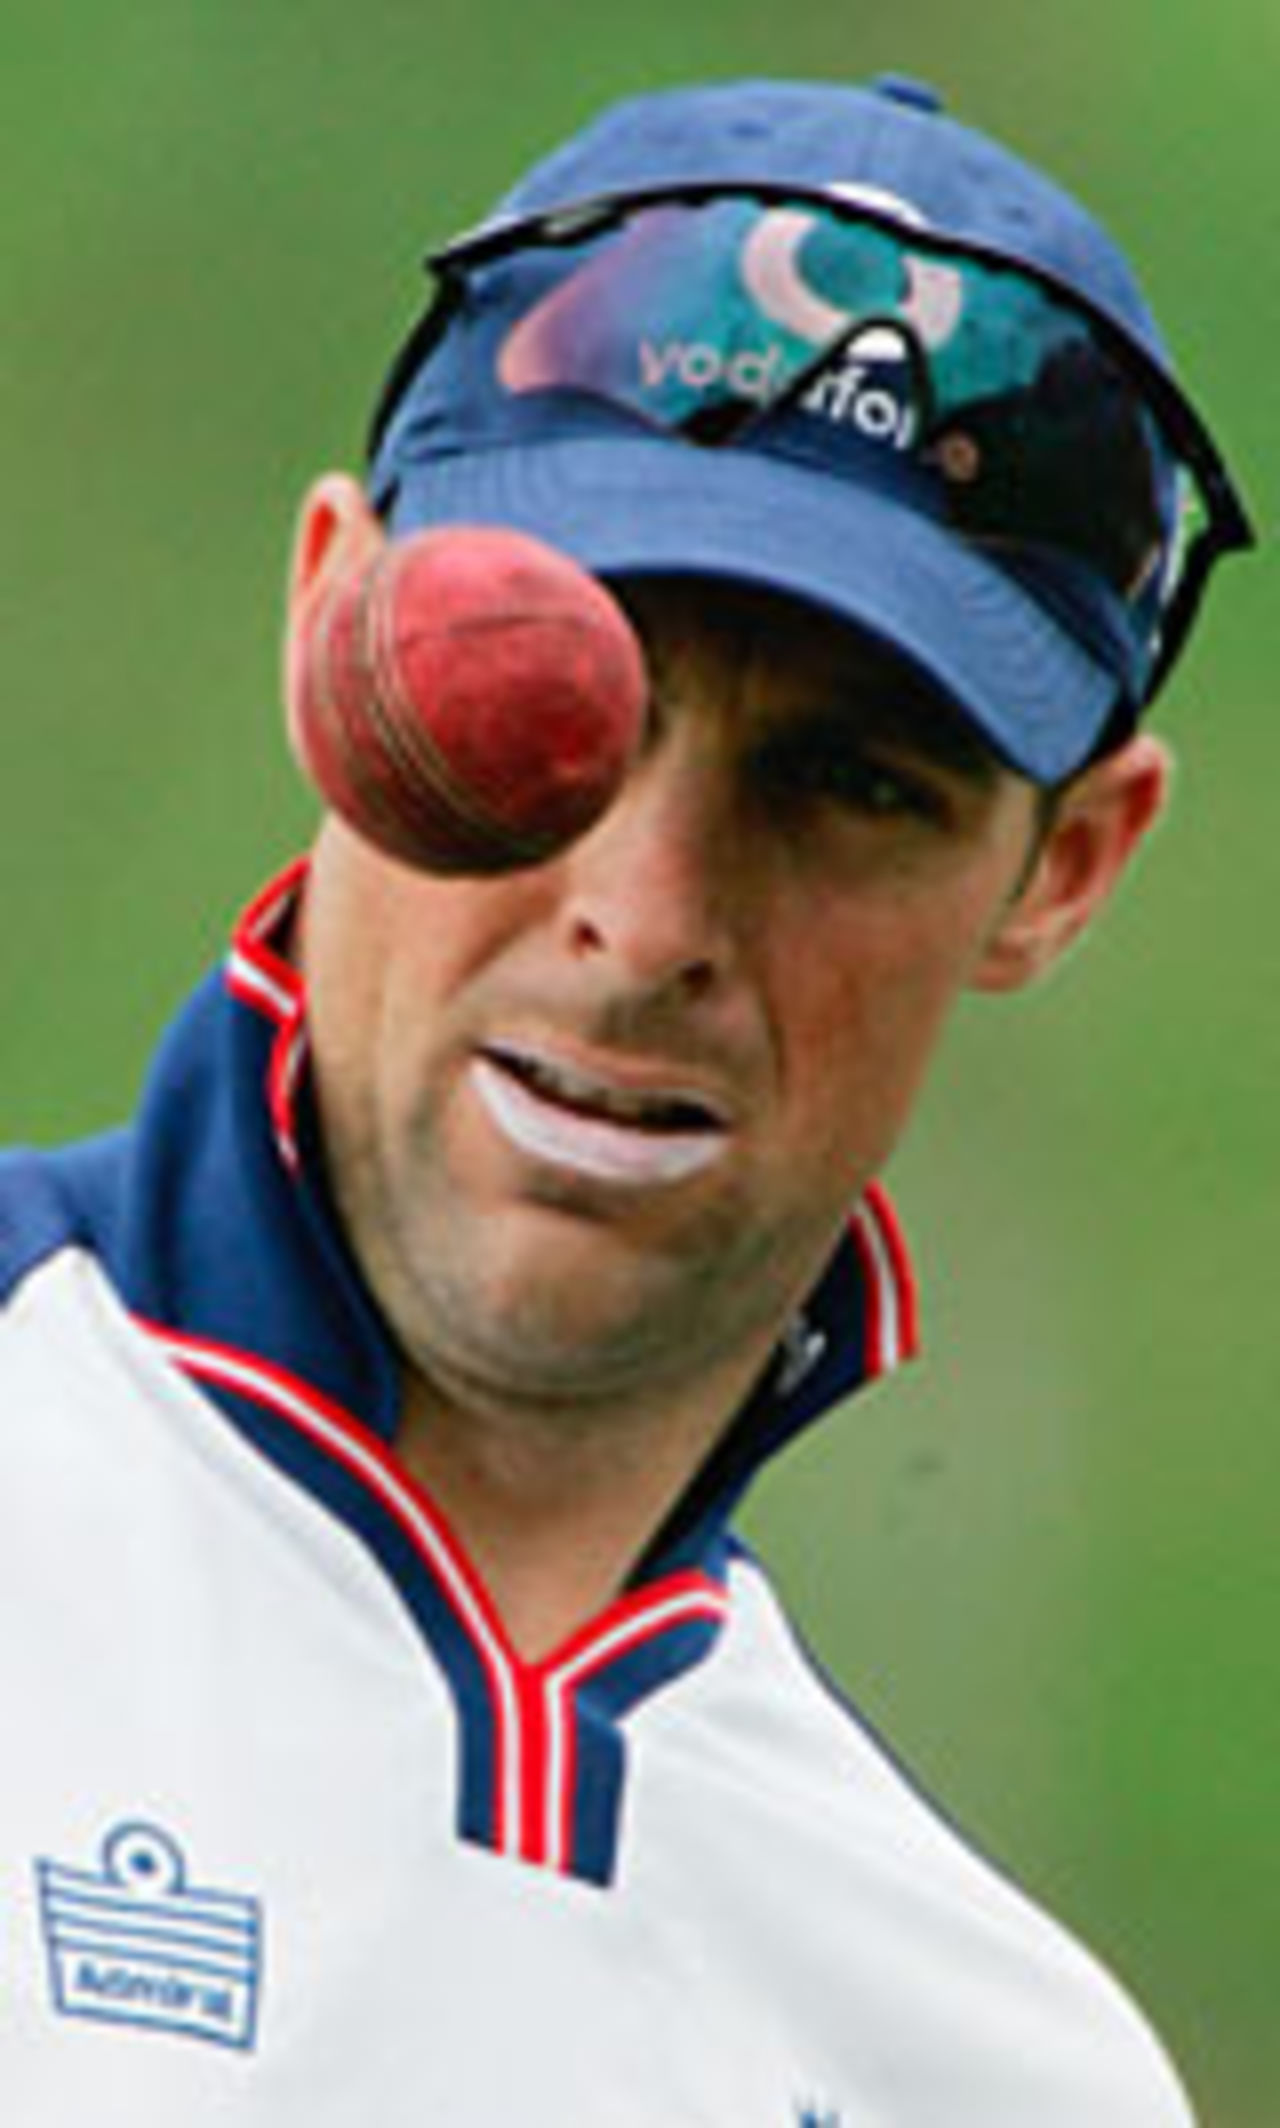 Marcus Trescothick tossing the ball during a practice session at The Wanderers, Johannesburg, December 9 2004